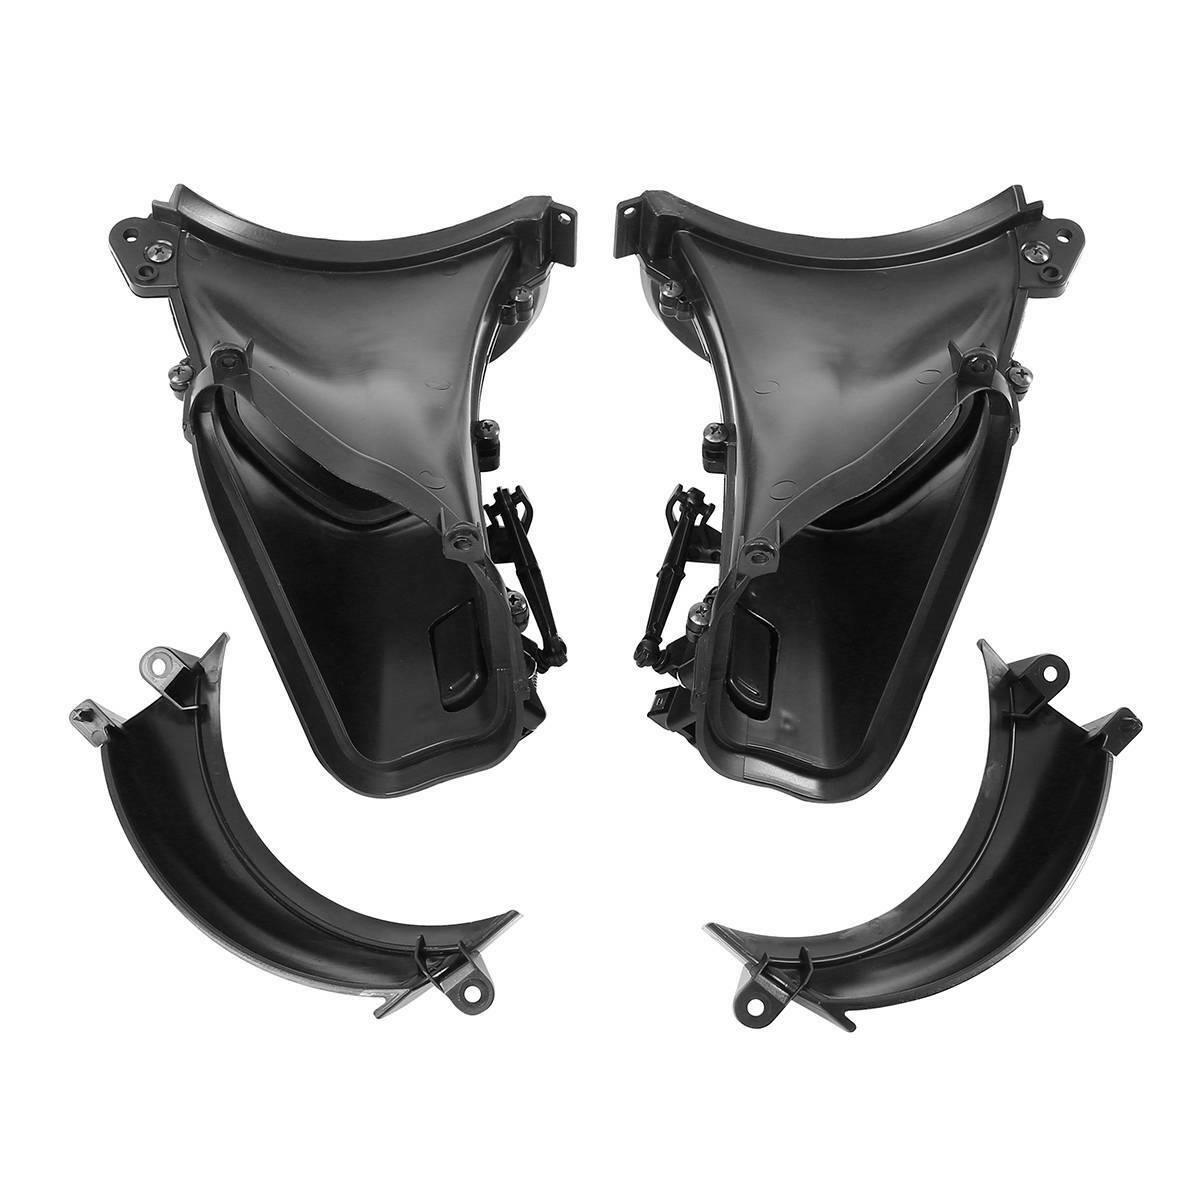 Black Pair Fairing Air Duct Fit For Harley Davidson Touring Road Glide 2015-2020 - Moto Life Products